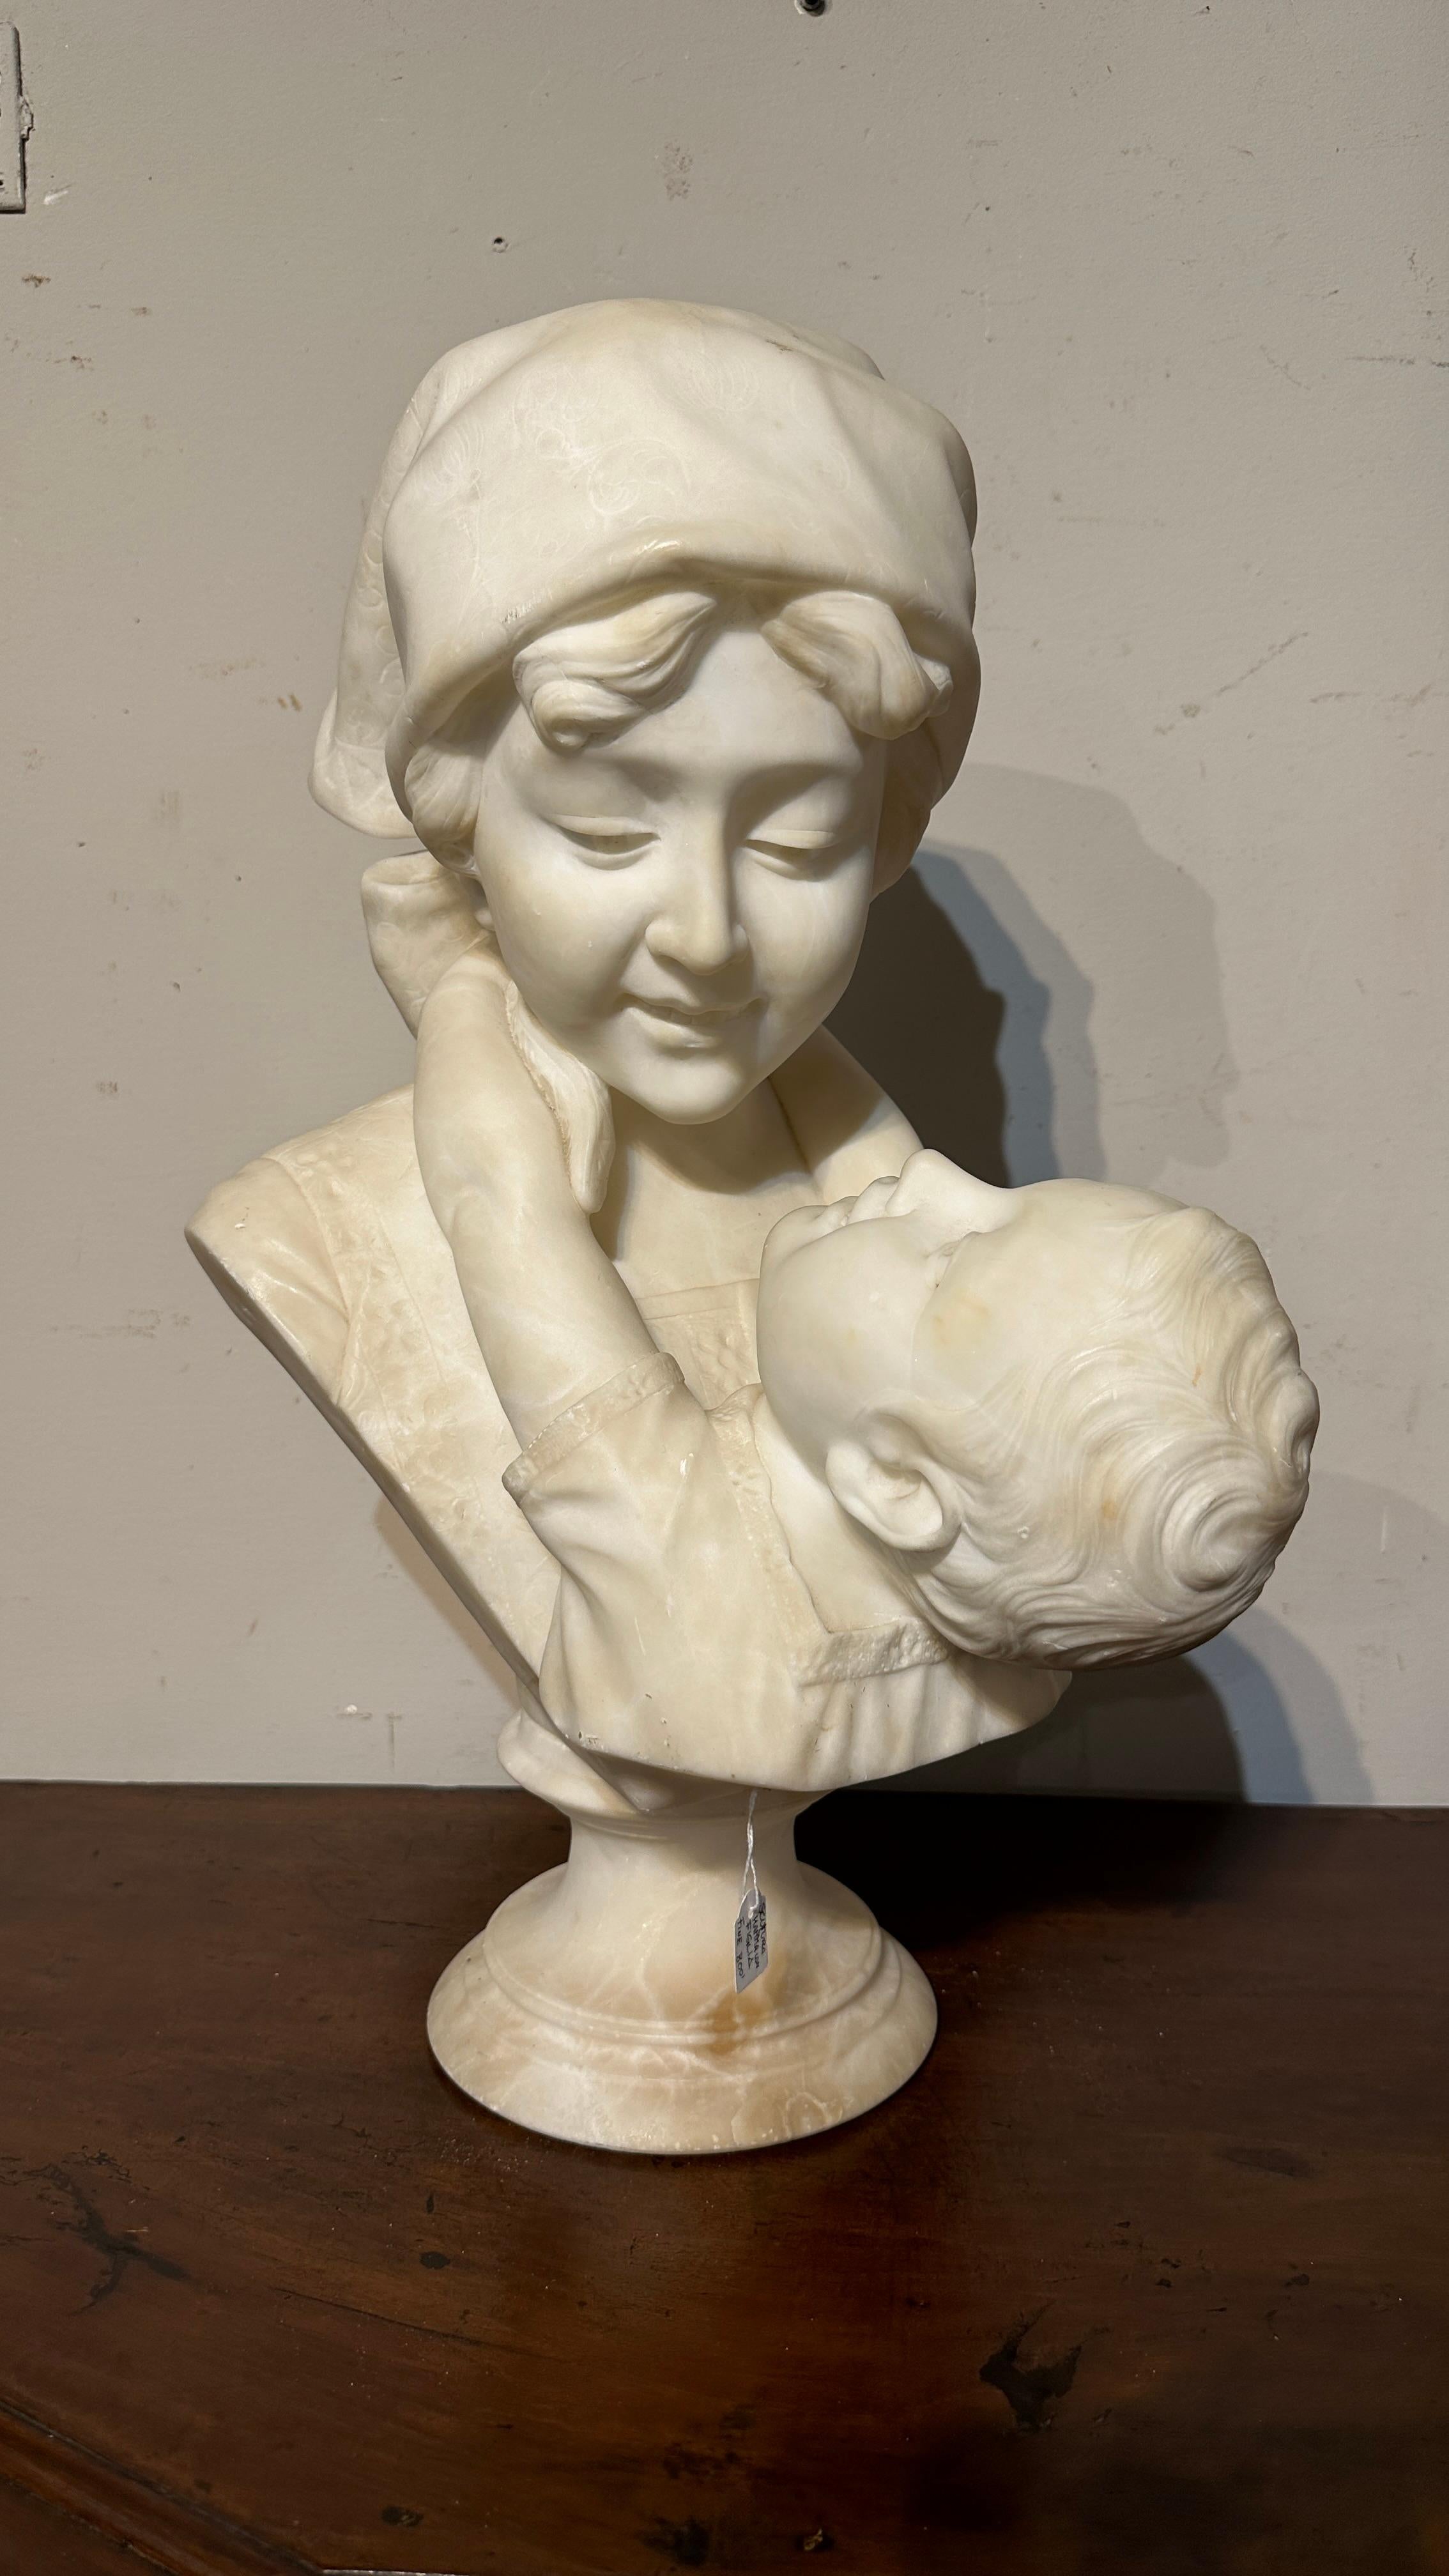 Coming from a Tuscan farmhouse, this enchanting marble sculpture is a valuable testimony to the typical Tuscan manufacturing of the mid-19th century. Hand-sculpted with skill, depicting the embrace of a son to his mother, transmitting the intensity